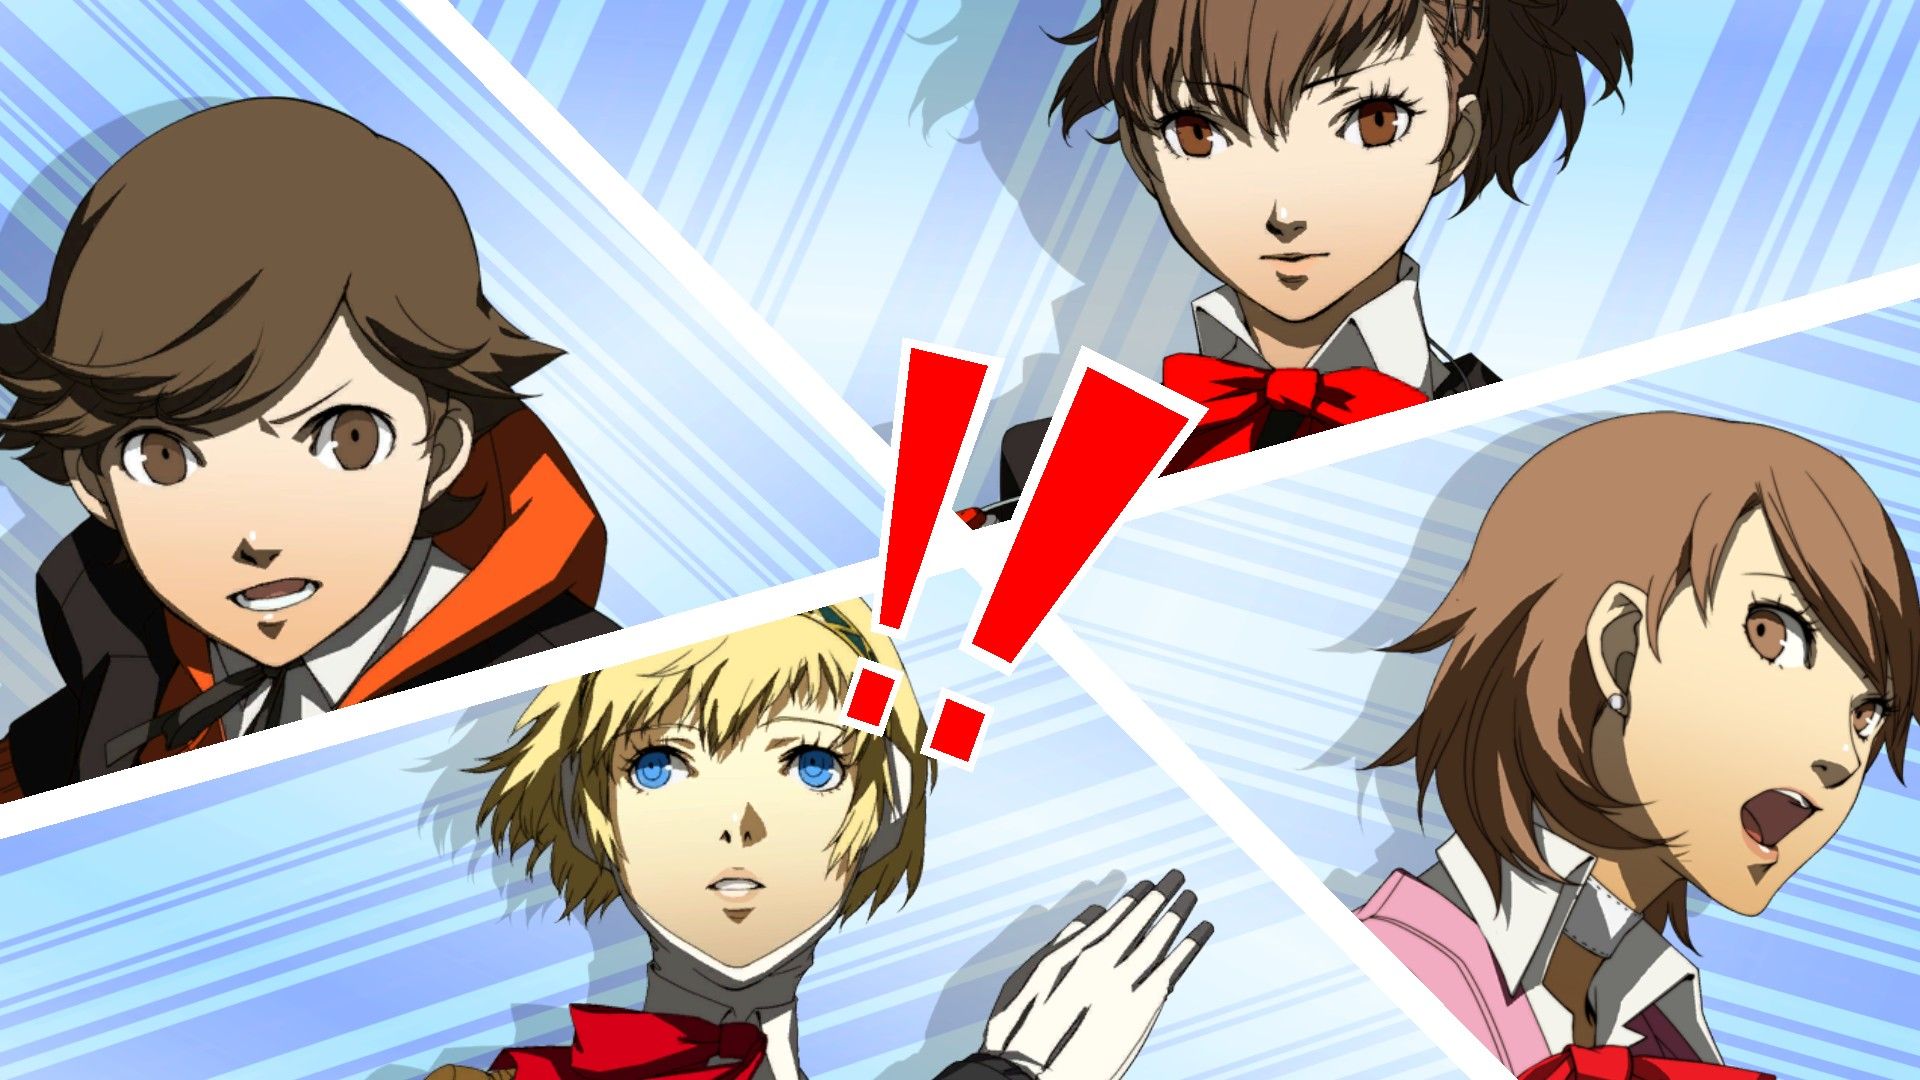 Ken, Aigis, Yukari, and p3p female protagonists in one of Persona 3 Portable's all-out attack screens